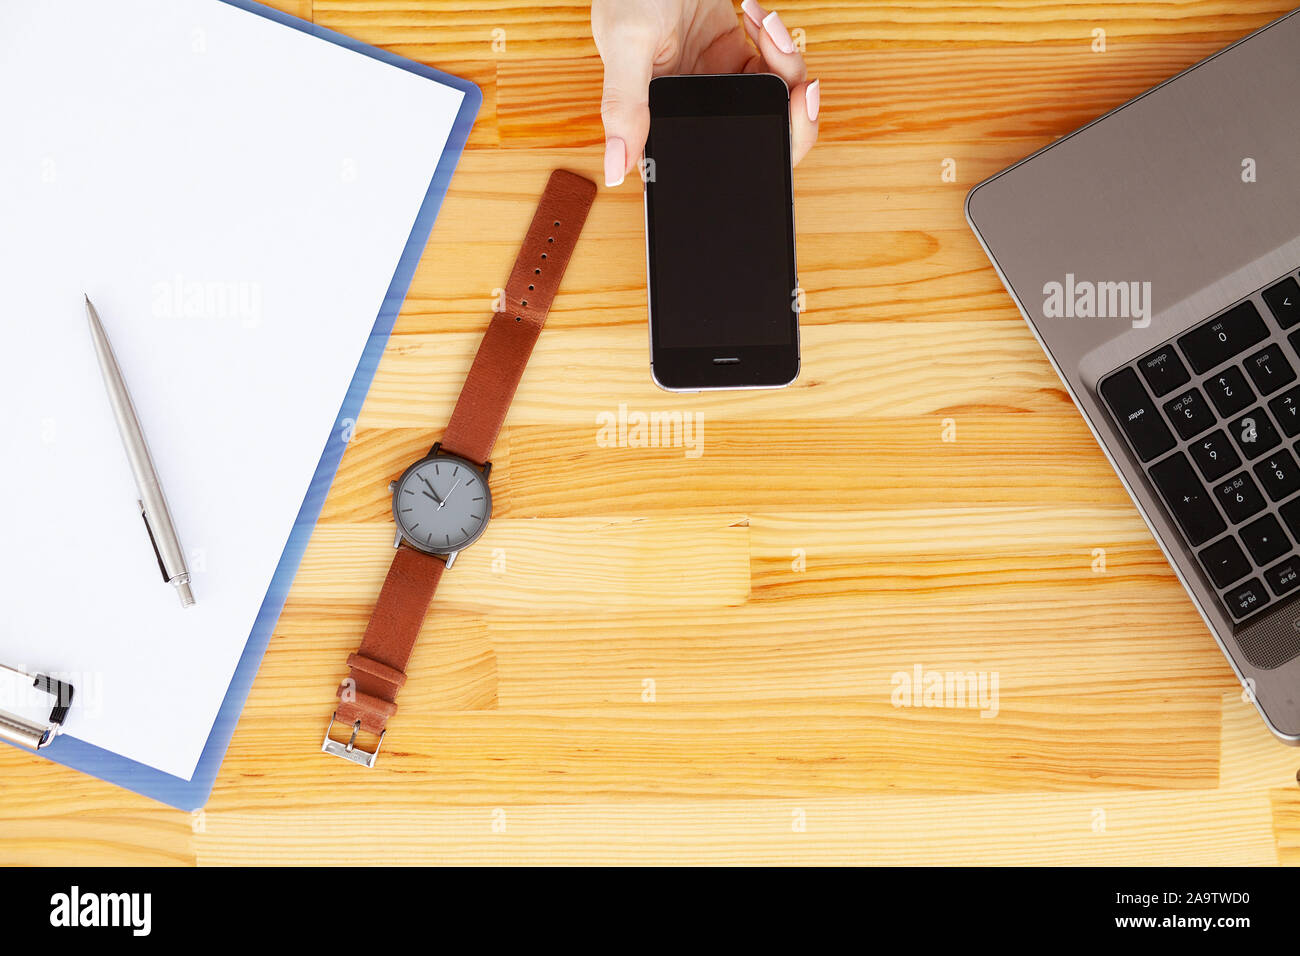 Contract. Blank of paper is on a wooden desk. Blank a4 paper is in the middle of wood office desk table with supplies. Top view with copy space, flat Stock Photo